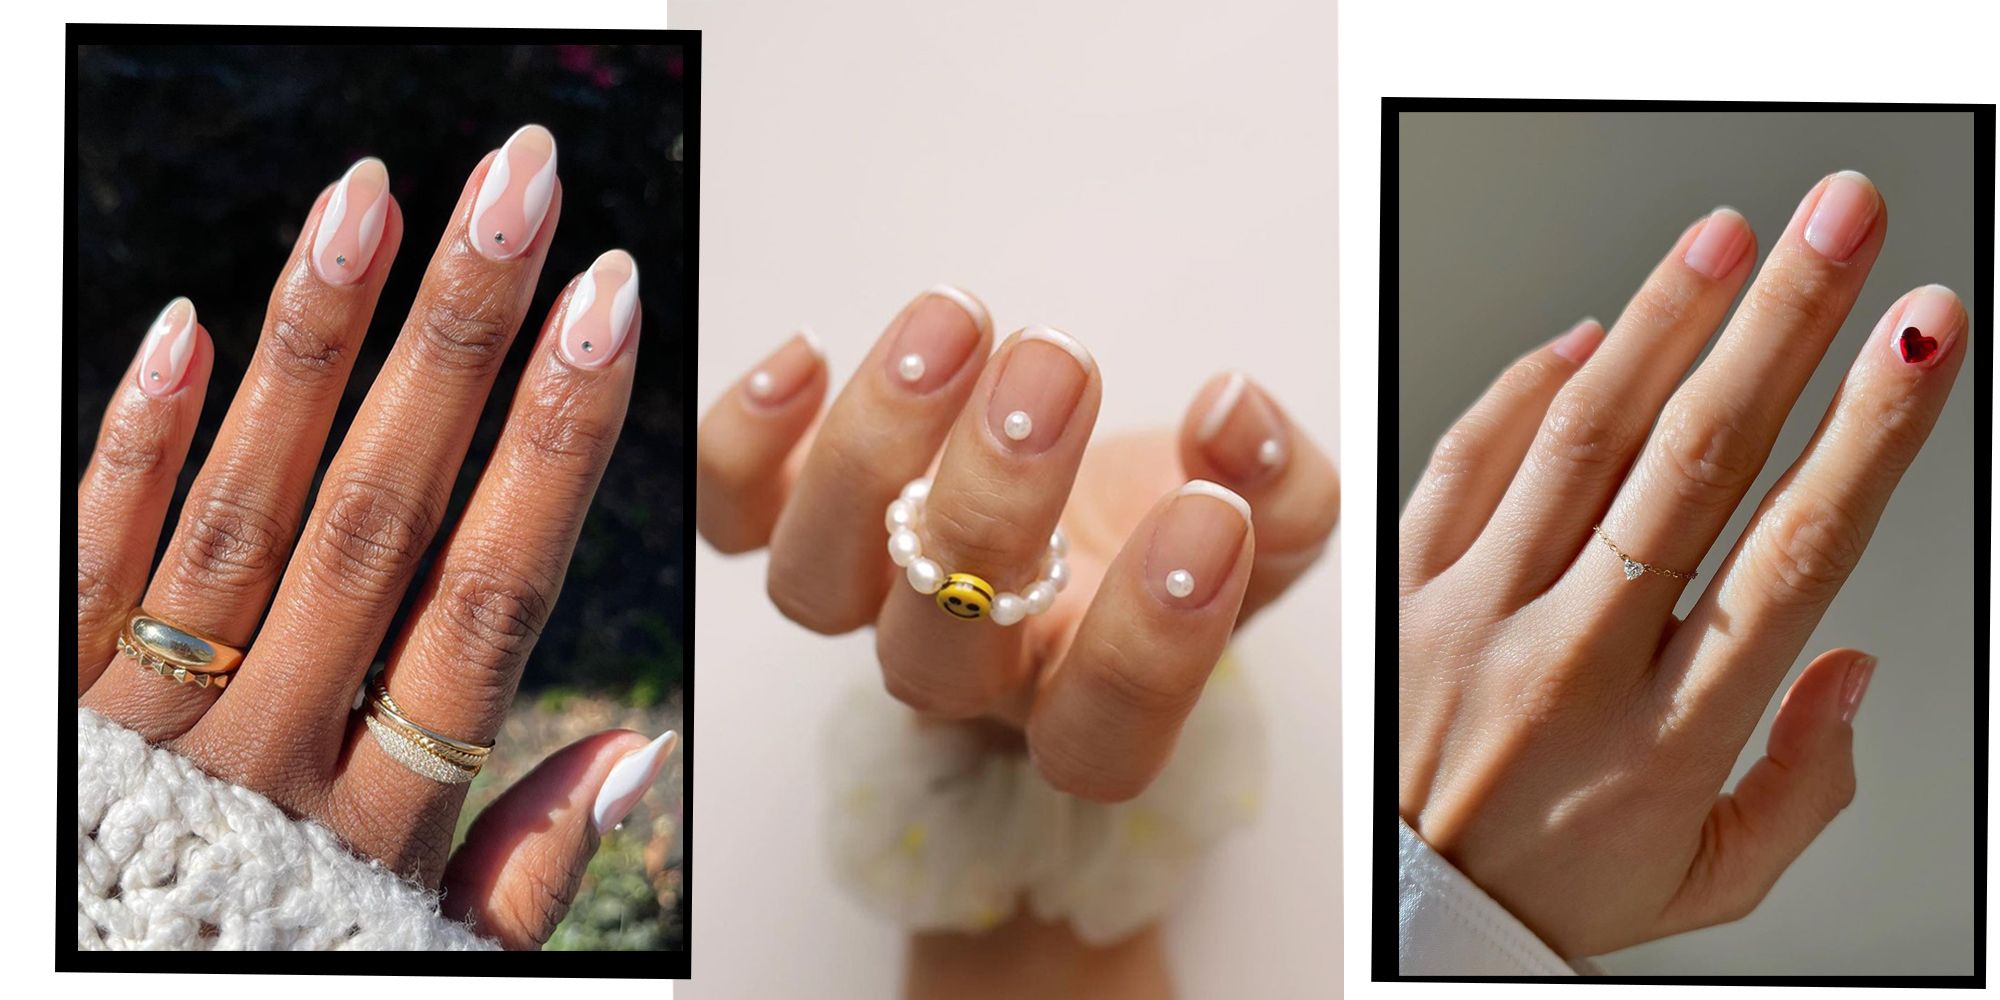 Best Wedding Nail Art Ideas for a Bridal Manicure in 2020 - JJ's House